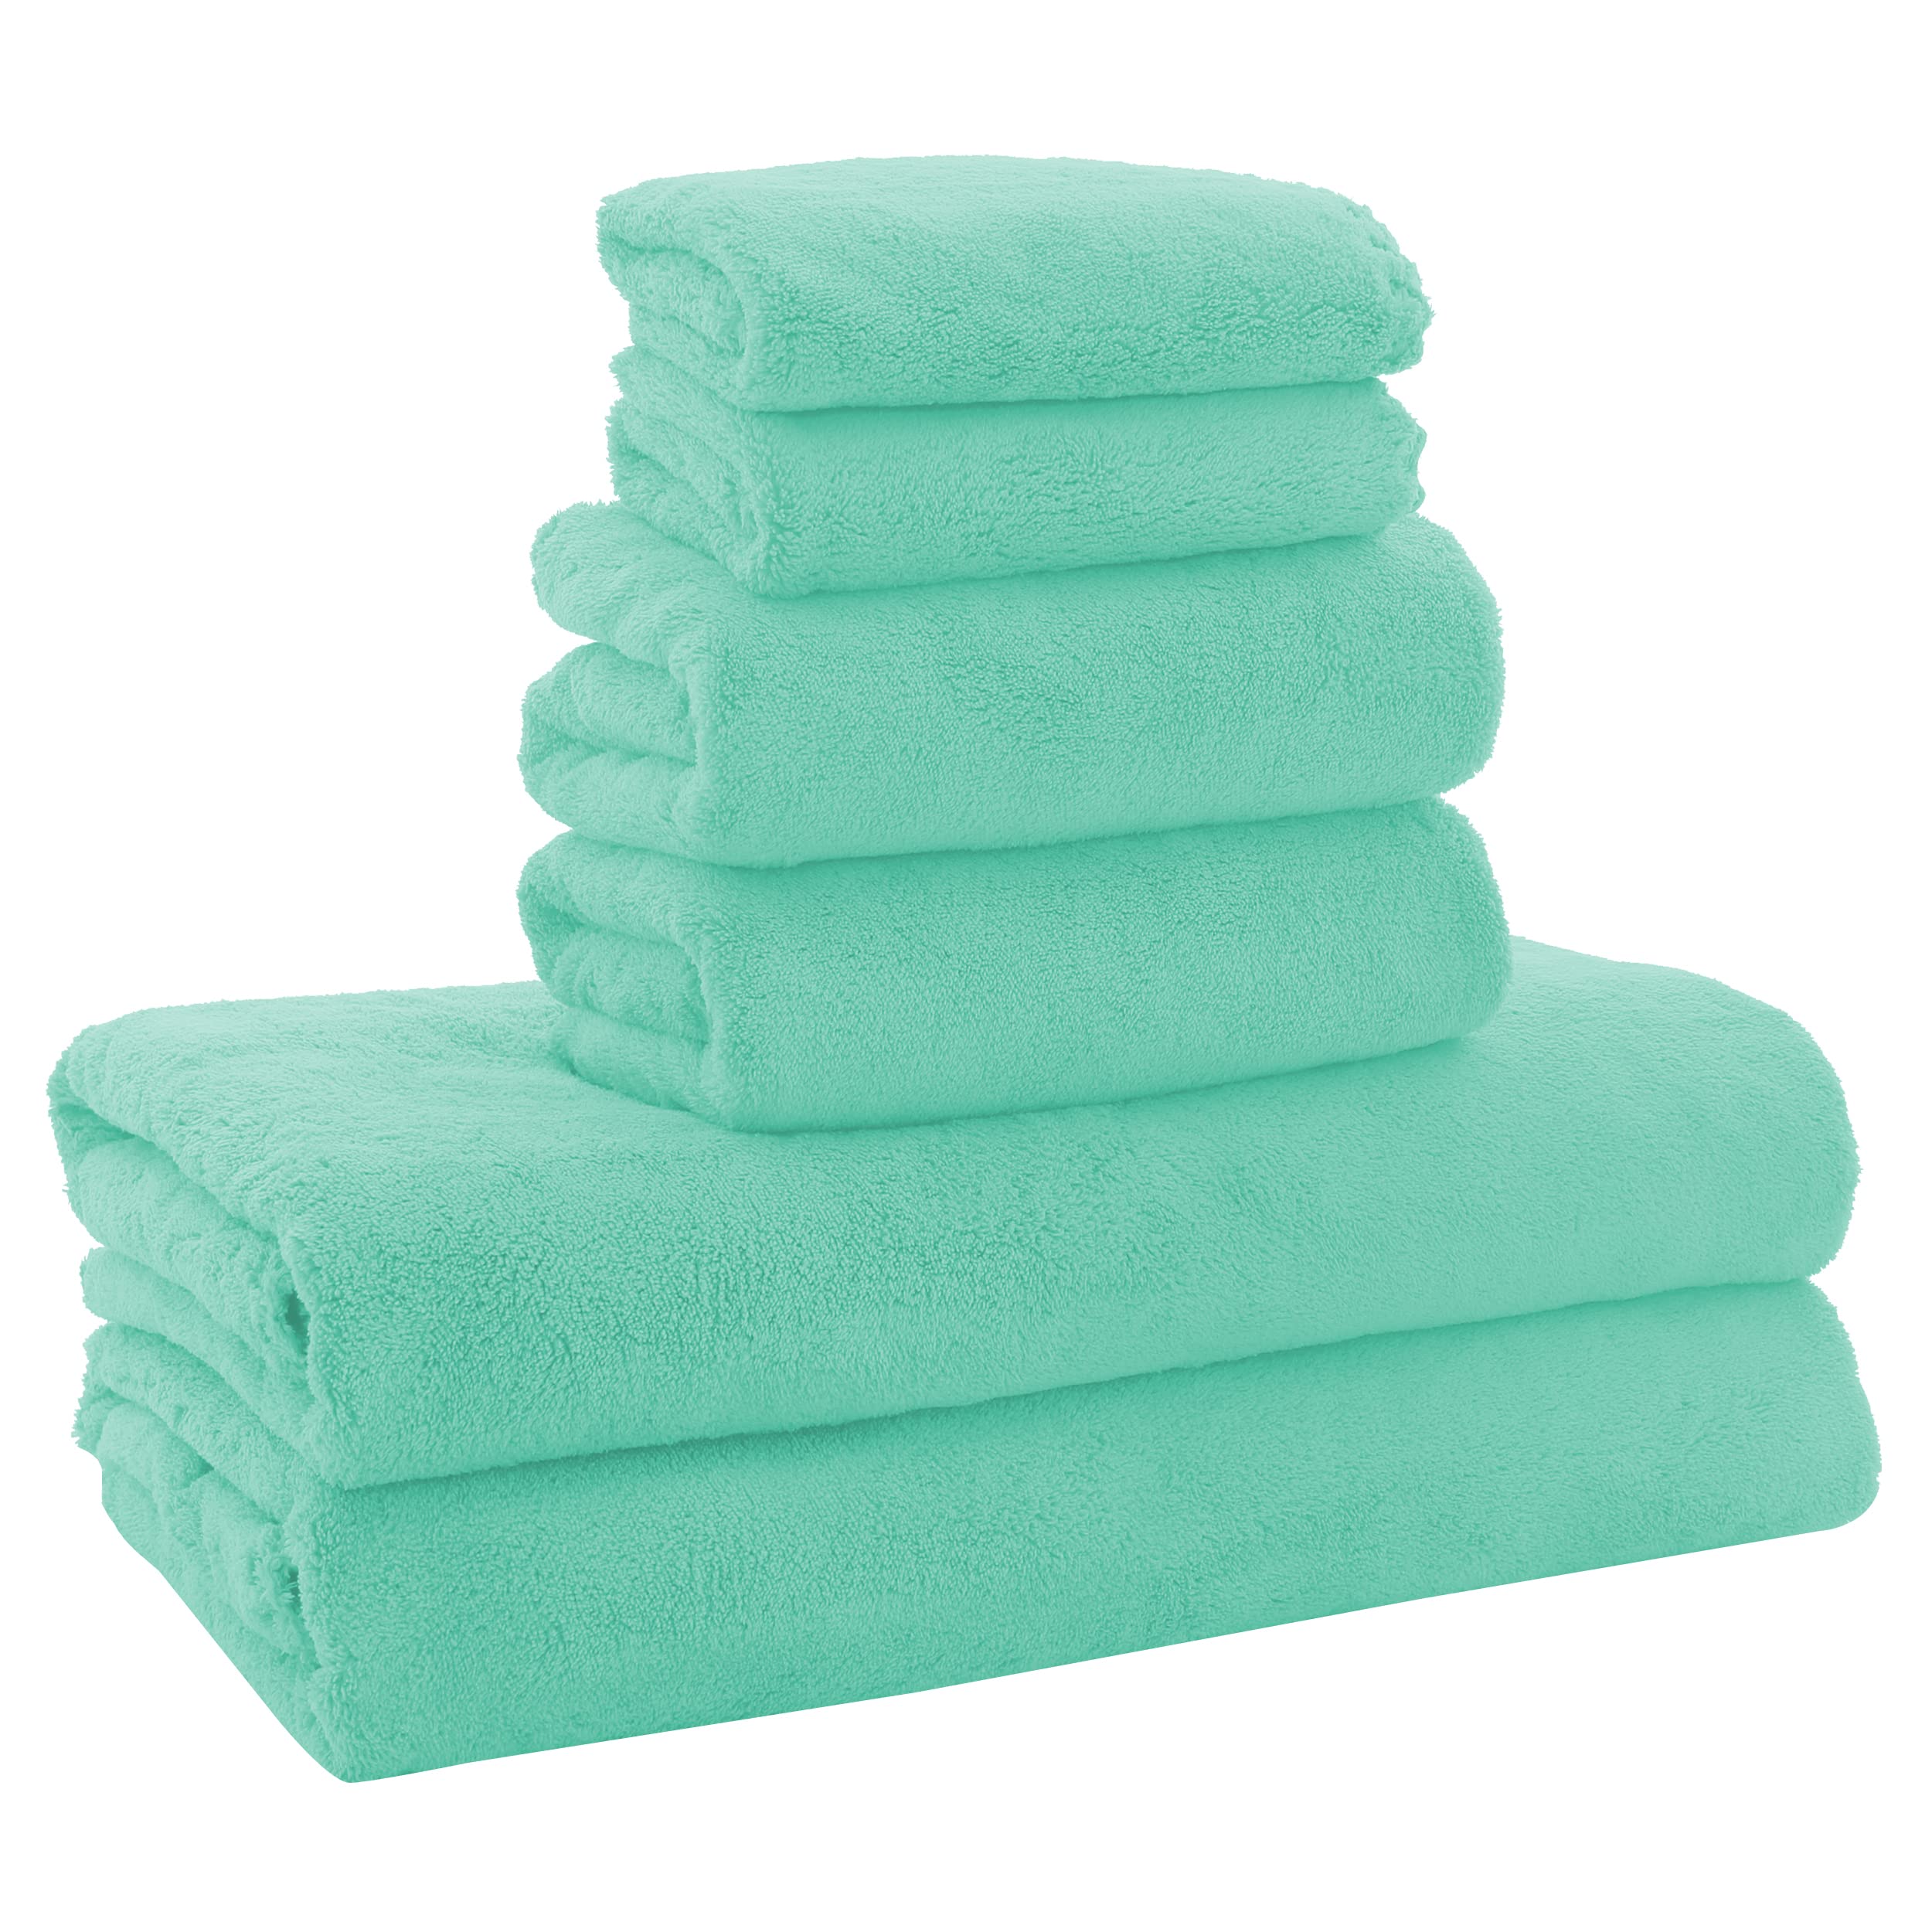 The MoonQueen Ultra Soft Towel Set Is Up to 52% Off at